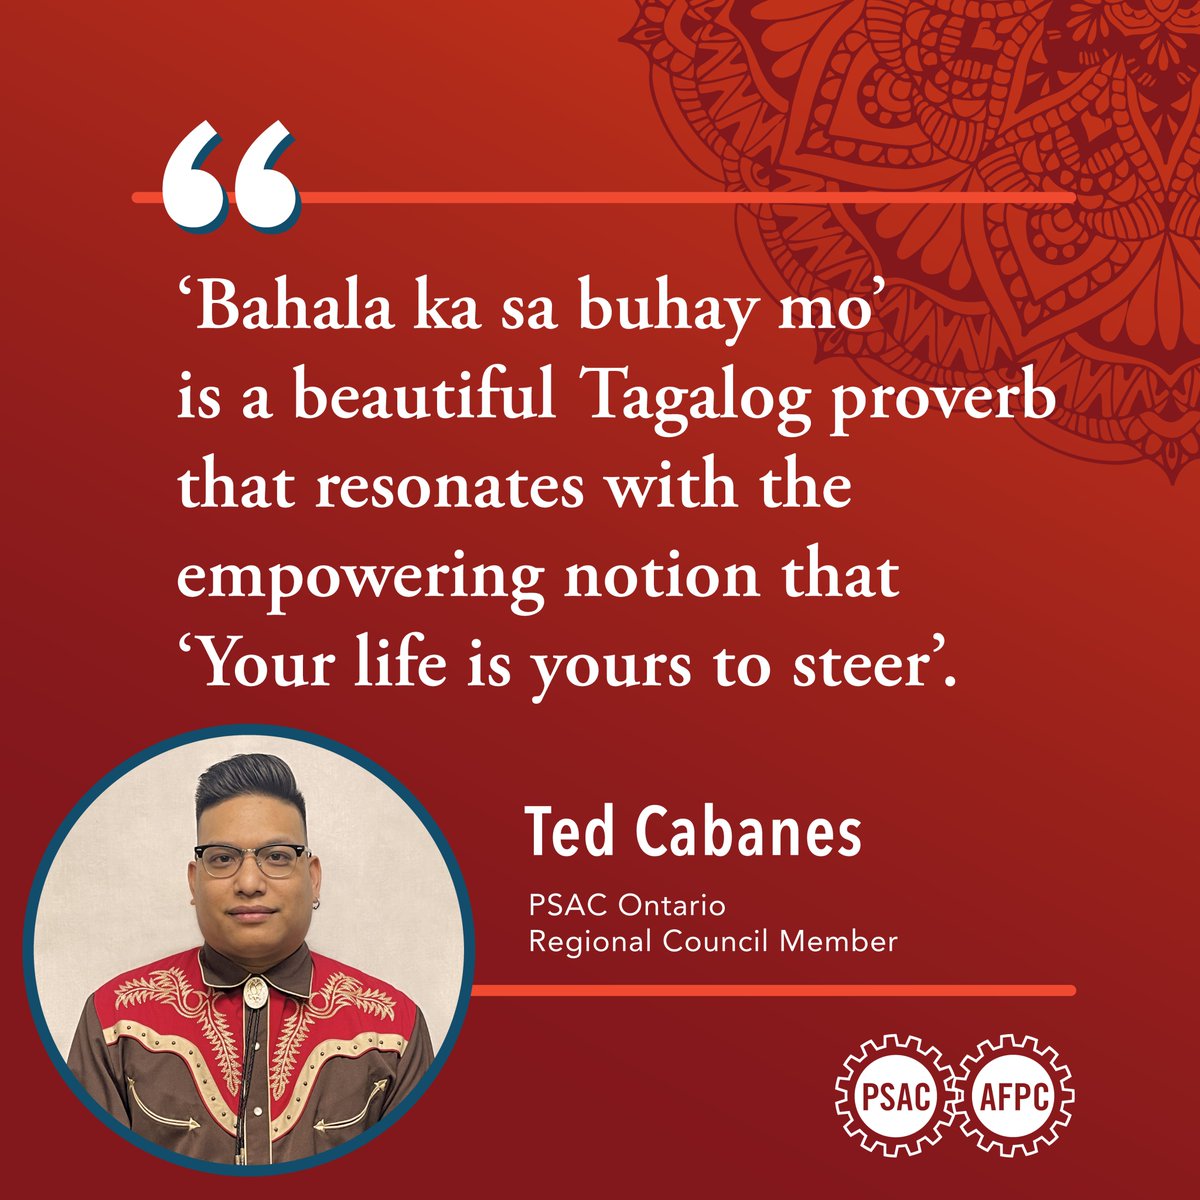 “‘Bahala ka sa buhay mo’ is a beautiful Tagalog proverb that resonates with the empowering notion that ‘Your life is yours to steer.’- Ted Cabanes, PSAC Ontario Regional Council Member 1/3